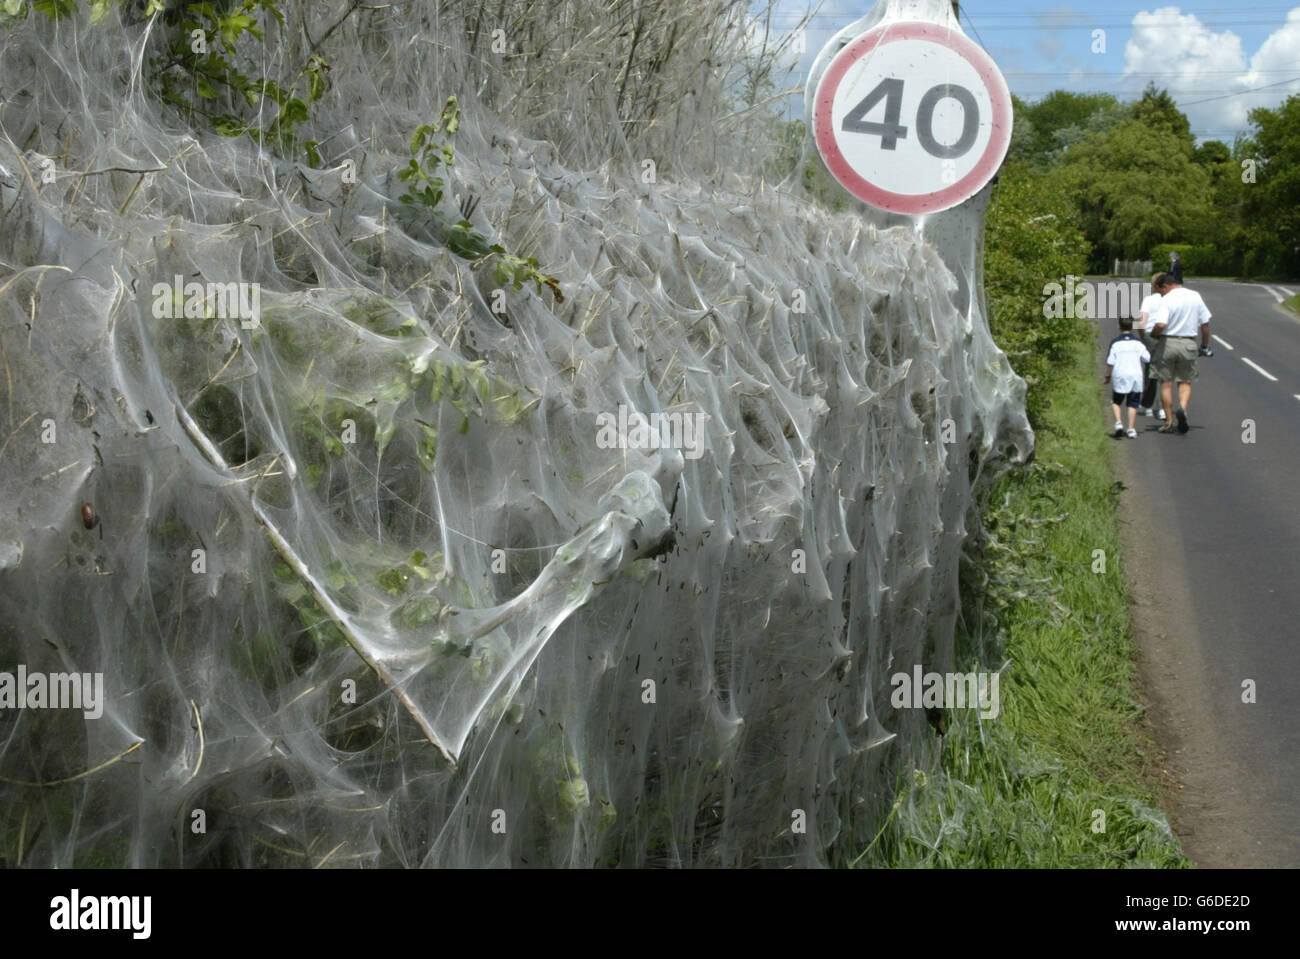 Yponemeuta Padella, or ermine moth caterpillars weave an intricate web over a roadside hawthorn hedge and speed sign in Catherington near Portsmouth. The phenomenon would have begun last August when the larvae would have been laid in the hedge. * ... but have only just come to the attention of passers by as they creat the web as protection while they devour the buds and leaves. Experts say that in June the moths will mature and mate before dying two weeks later. The eerie sight has become a fascination to locals and passing drivers. Stock Photo